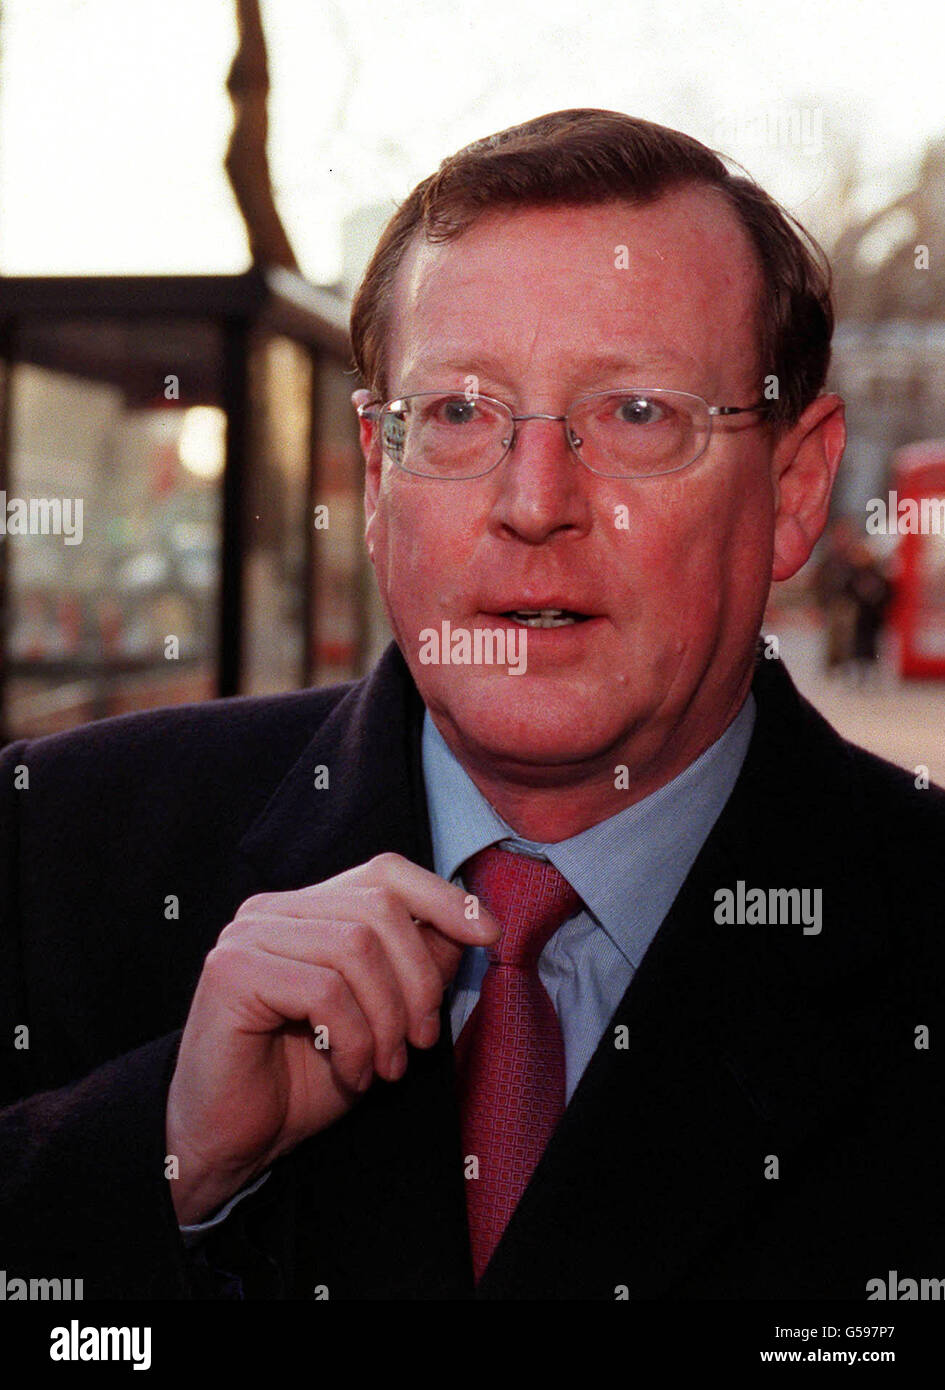 Northern Ireland First Minister David Trimble arrives at the Treasury in central London, for talks with British Chancellor of the Exchequer Gordon Brown. * 10/2/2001: Ulster Unionist leader David Trimble will today outline to his party executive his next move in the Northern Ireland peace process. The Northern Ireland First Minister will face some of his sternest critics at the meeting in UUP headquarters in Belfast as the pressure mounted on him to step up sanctions against Sinn Fein over IRA decommissioning. Stock Photo